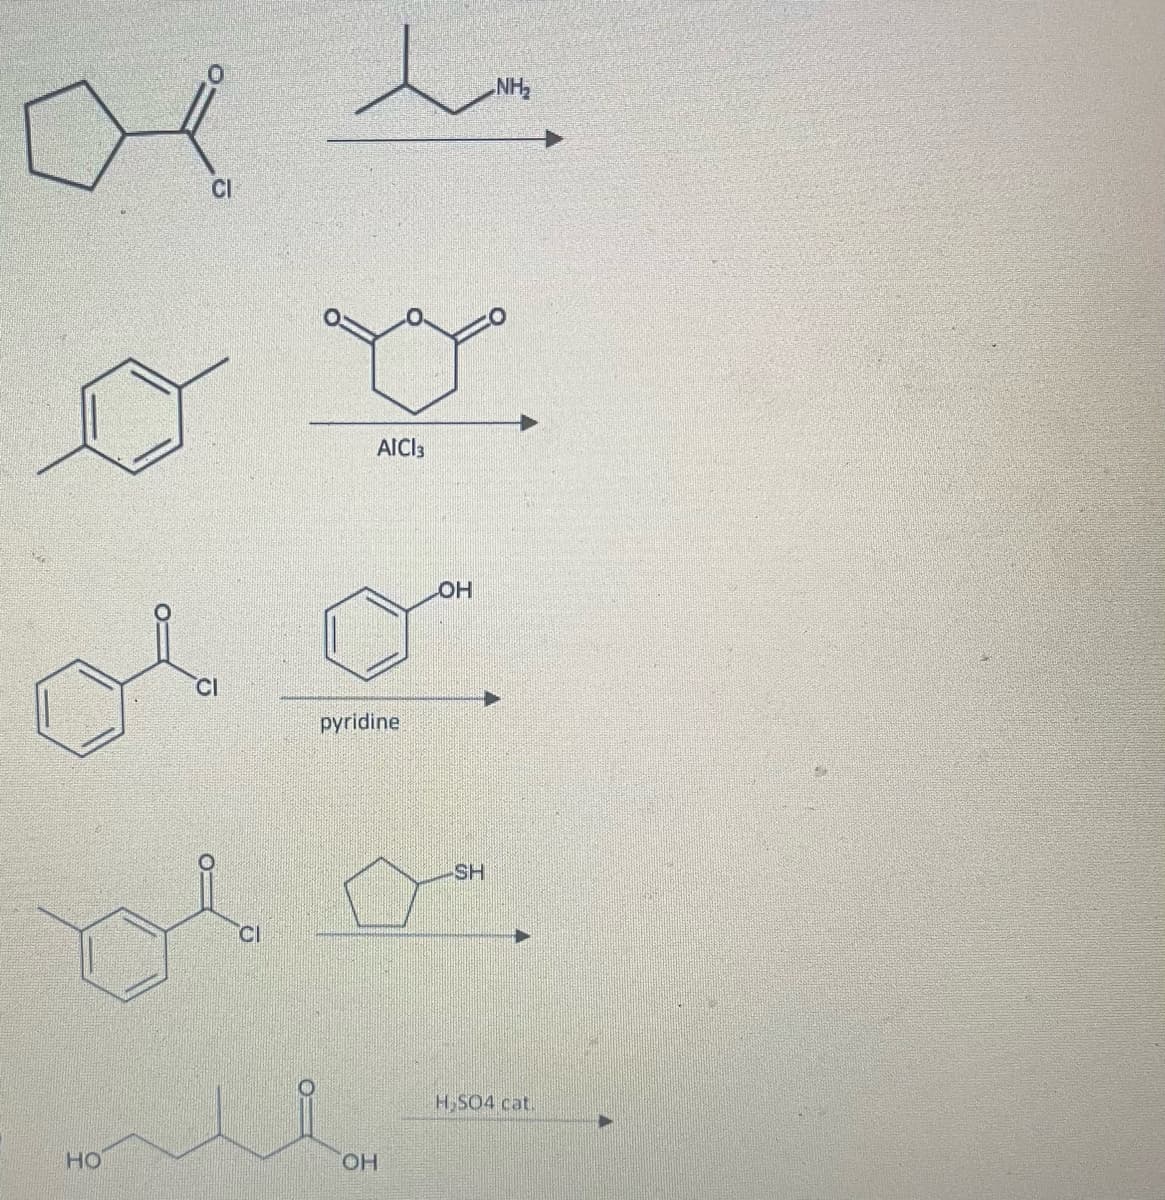 NH2
CI
AICI3
он
CI
pyridine
SH
CI
H,SO4 cat.
но
OH
